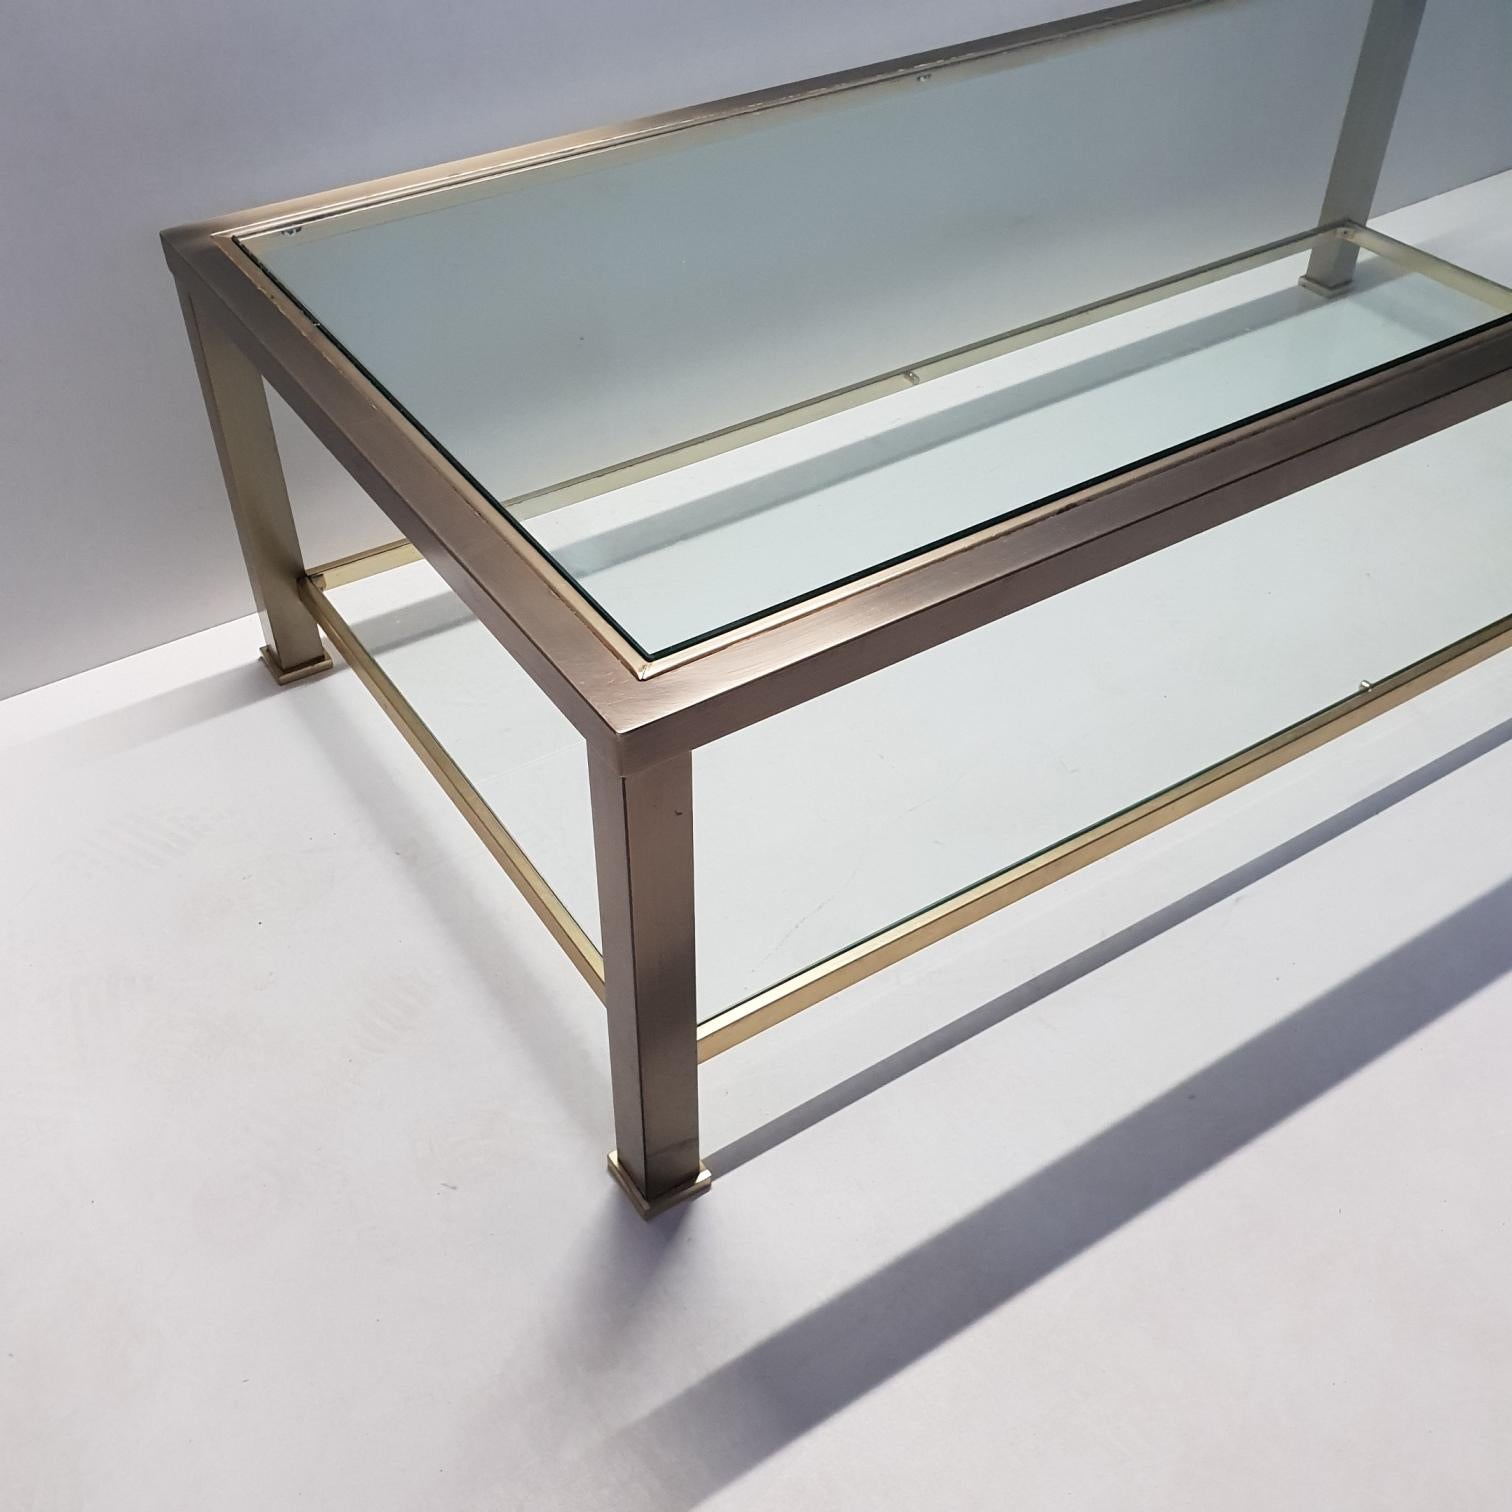 Brass 2-tiers coffee table with cut glass.
Made by Belgo Chrom, 1980s.

Industrial and Hollywood Regency style.